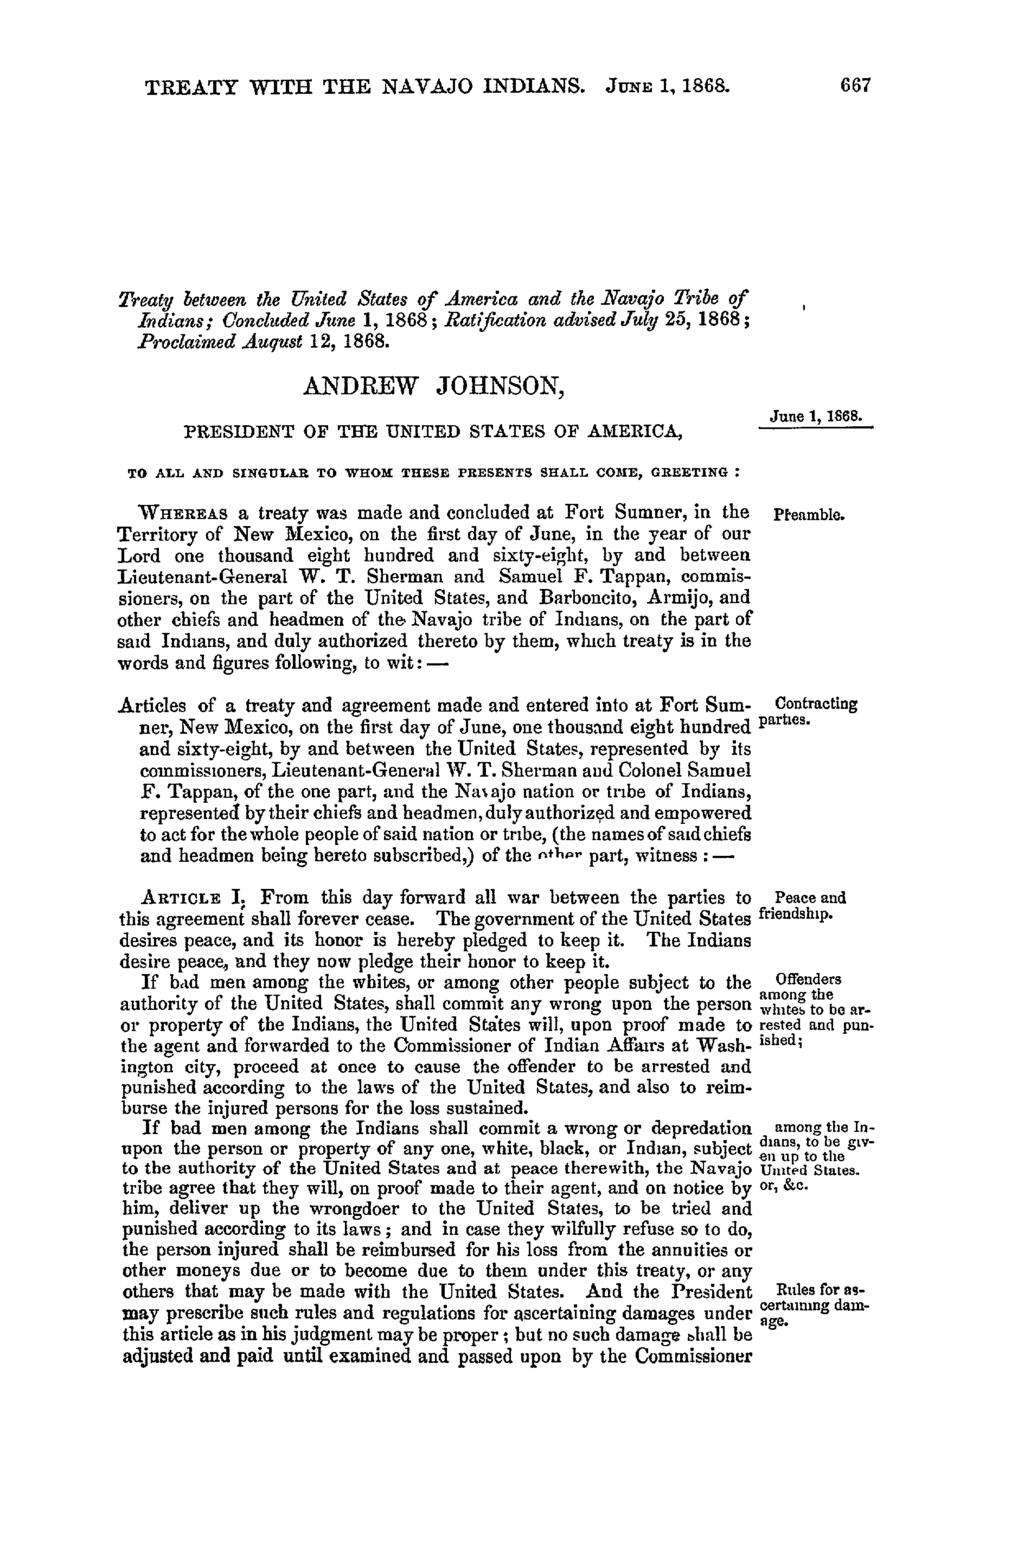 Case: 12-16958 05/15/2013 ID: 8630738 DktEntry: 9-3 Page: 71 of 99 TREATY WITH THE NAVAJO INDIANS. Jui-a 1, 1868.